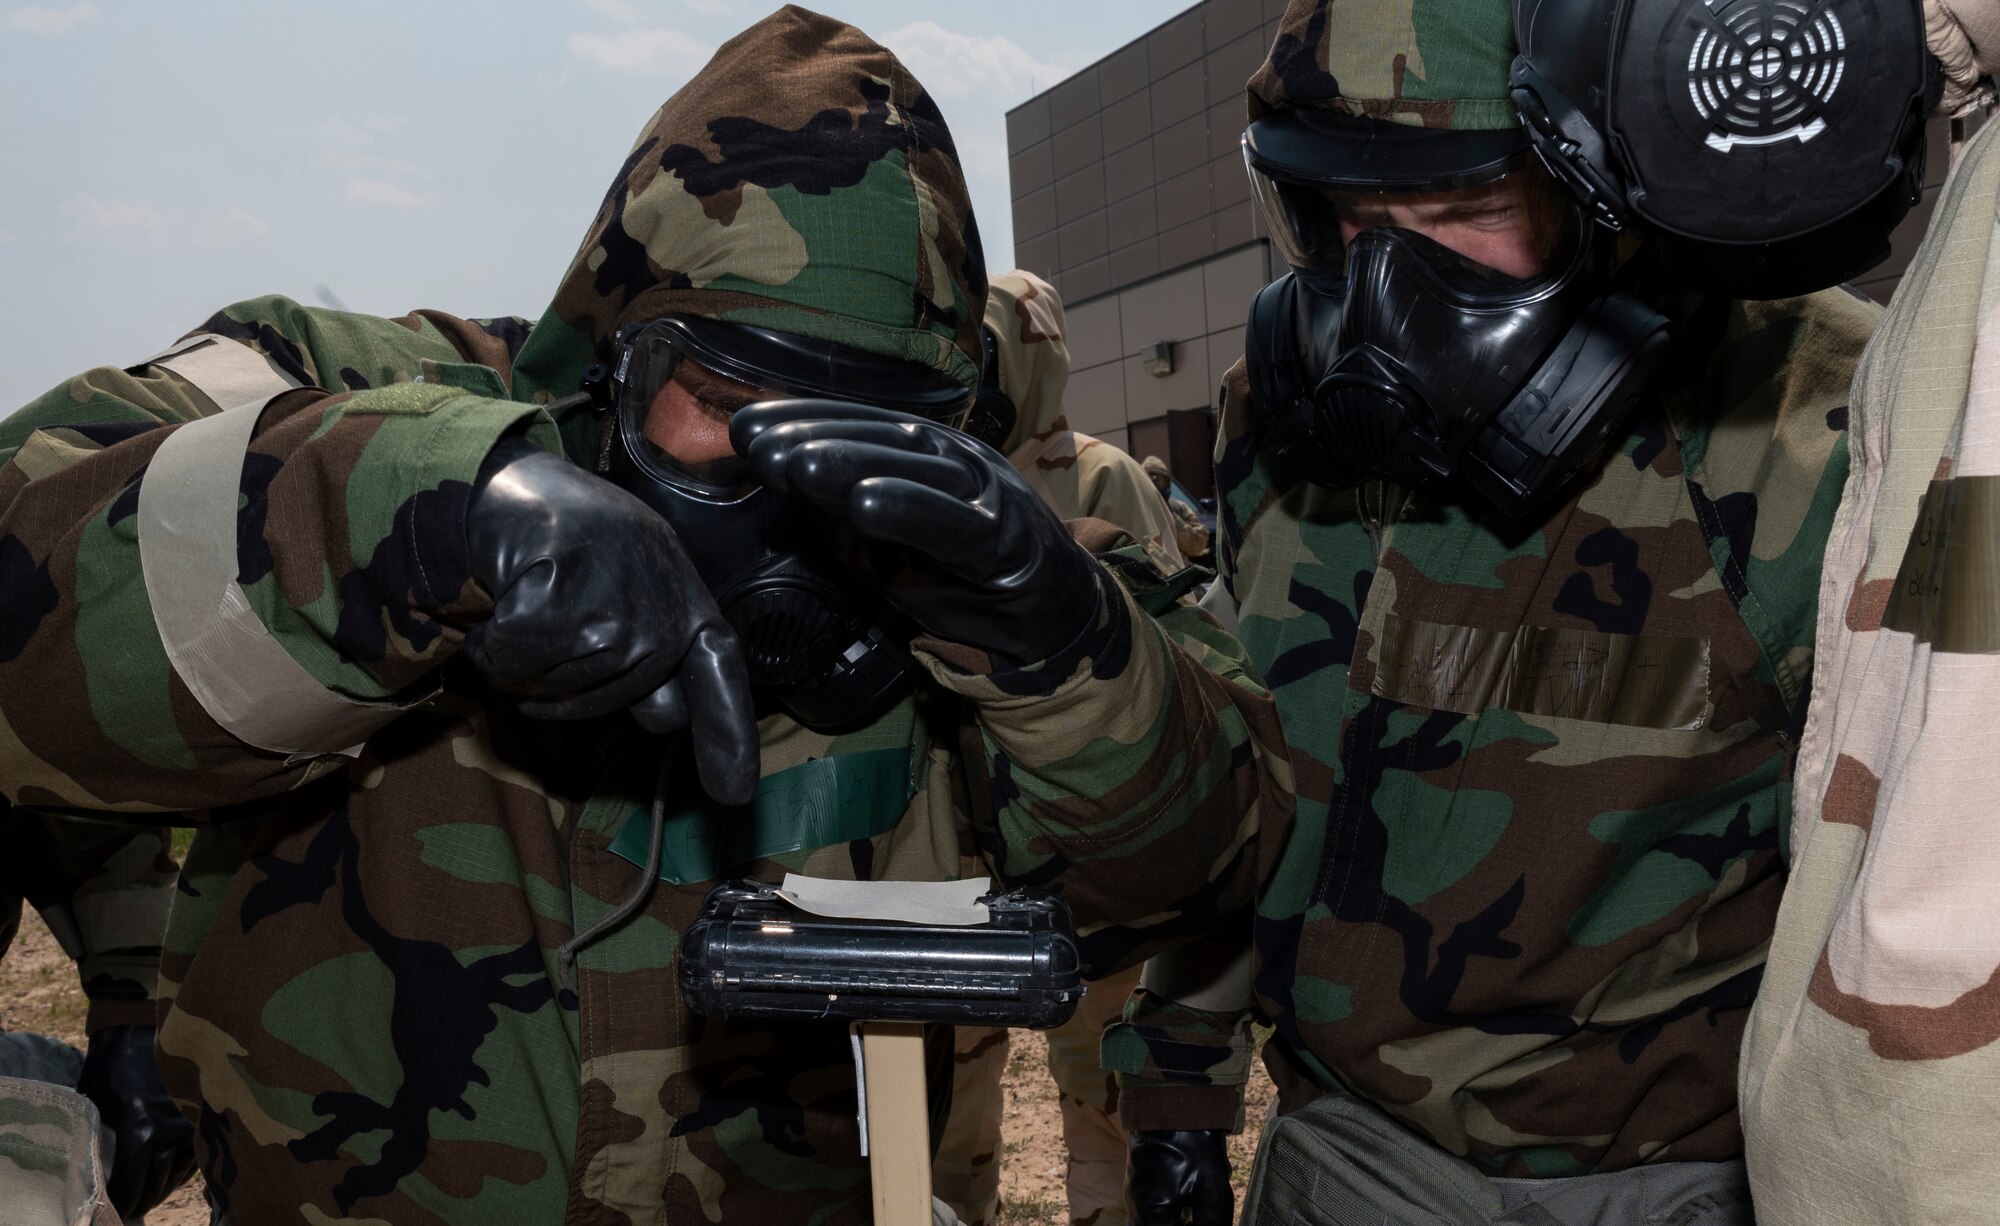 People dressed in chemical gear examine a piece of paper outside.